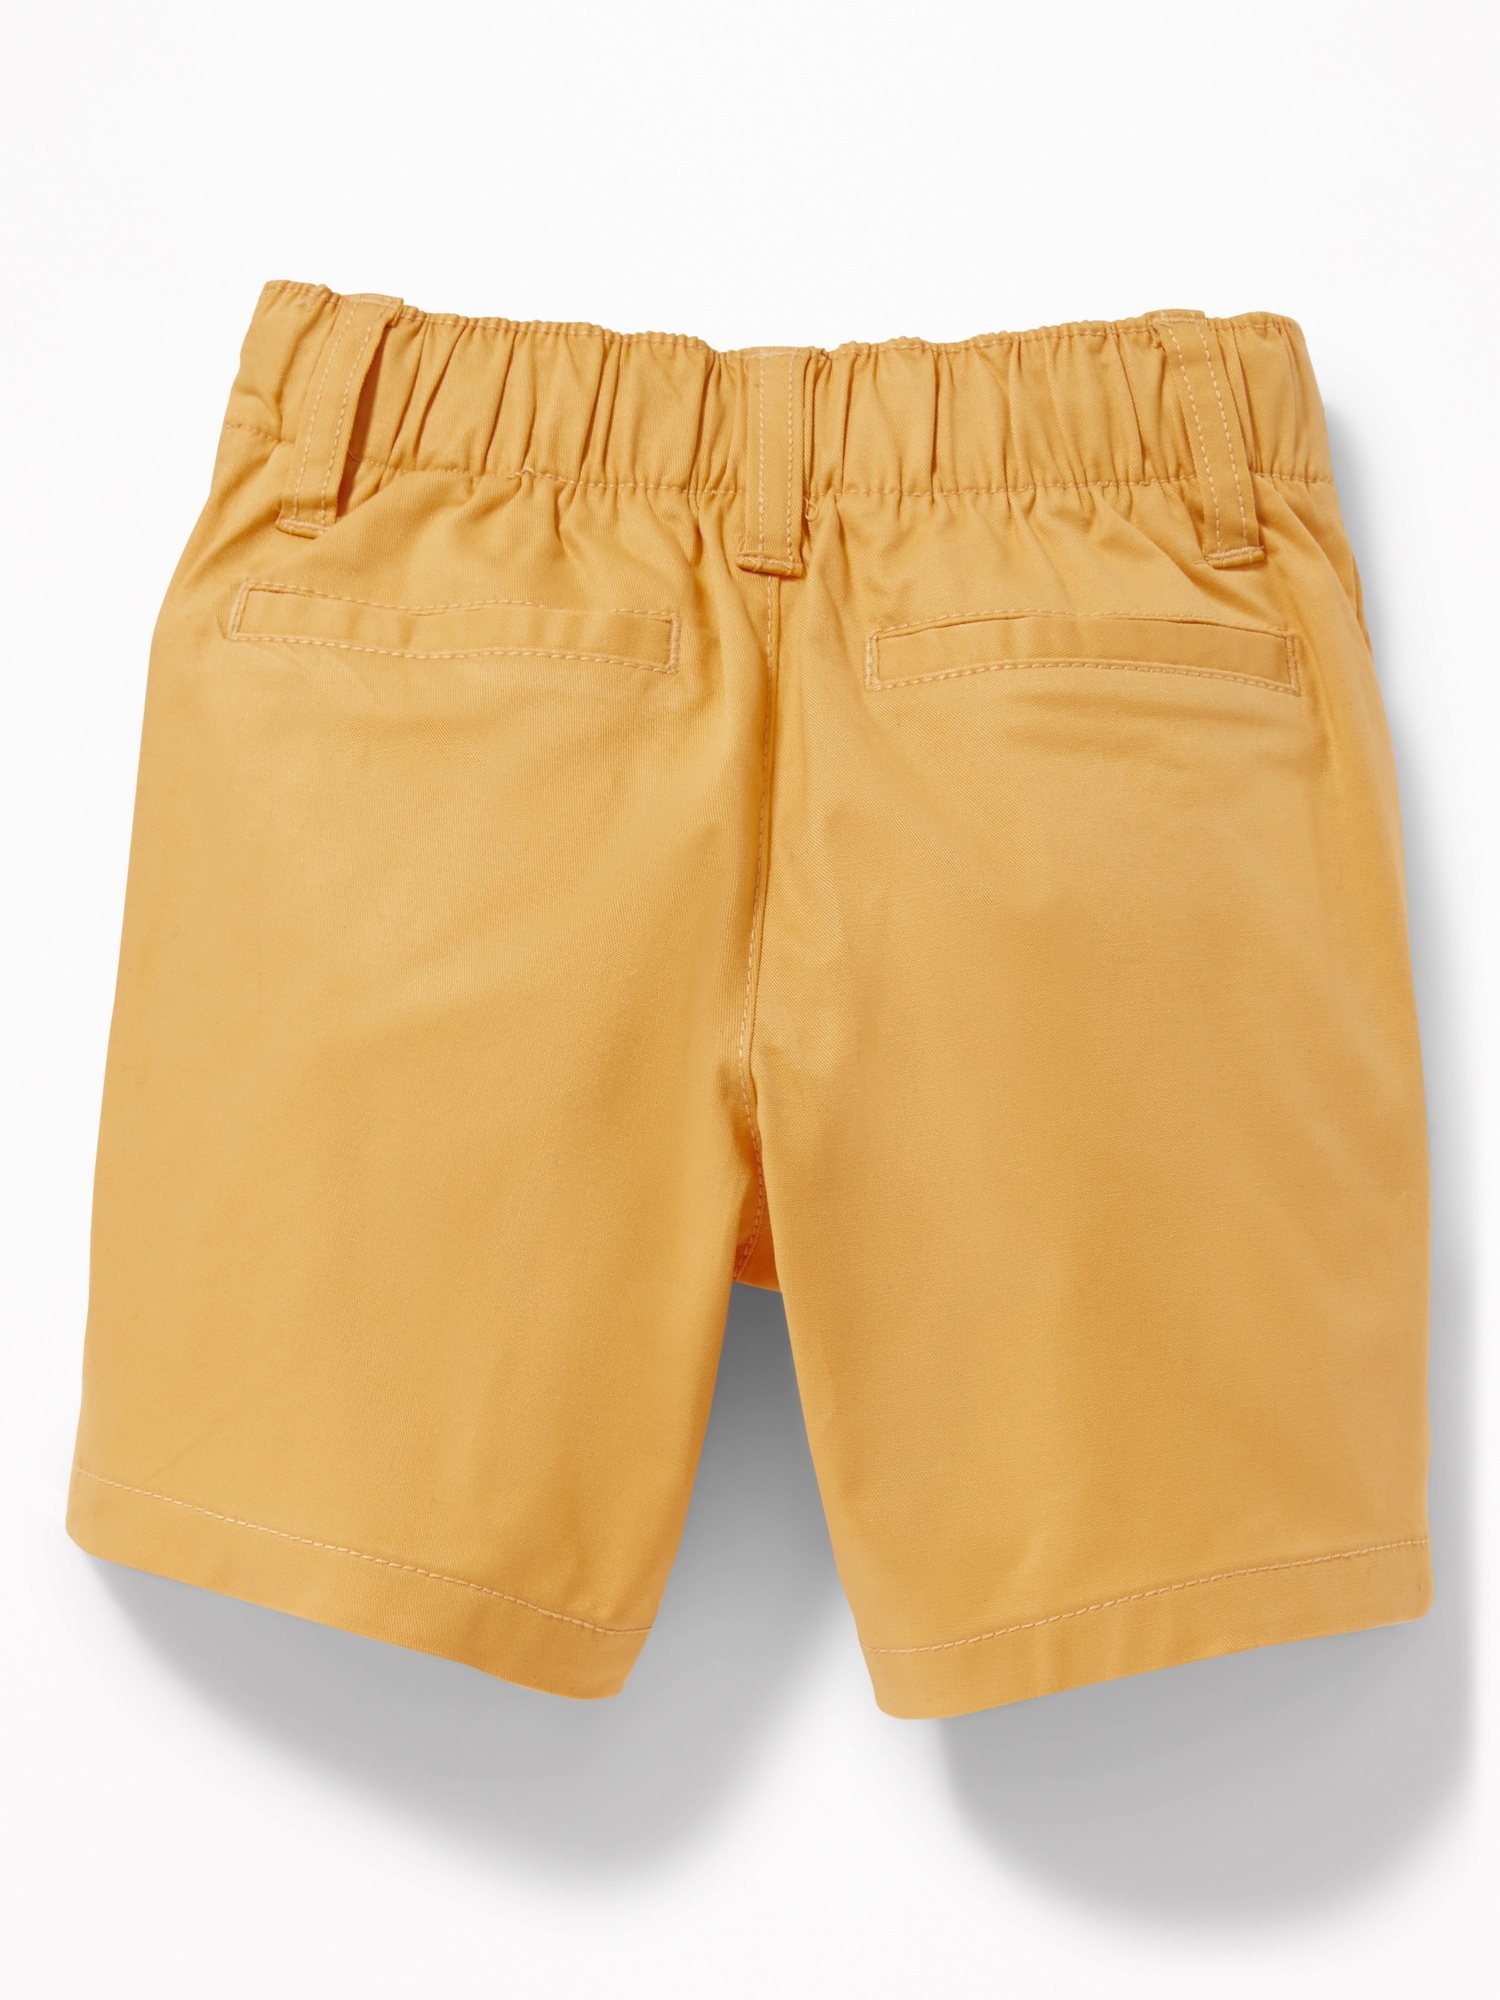 ON - Kids 'Red' Built-In Flex Straight Twill Cotton Shorts ON192 